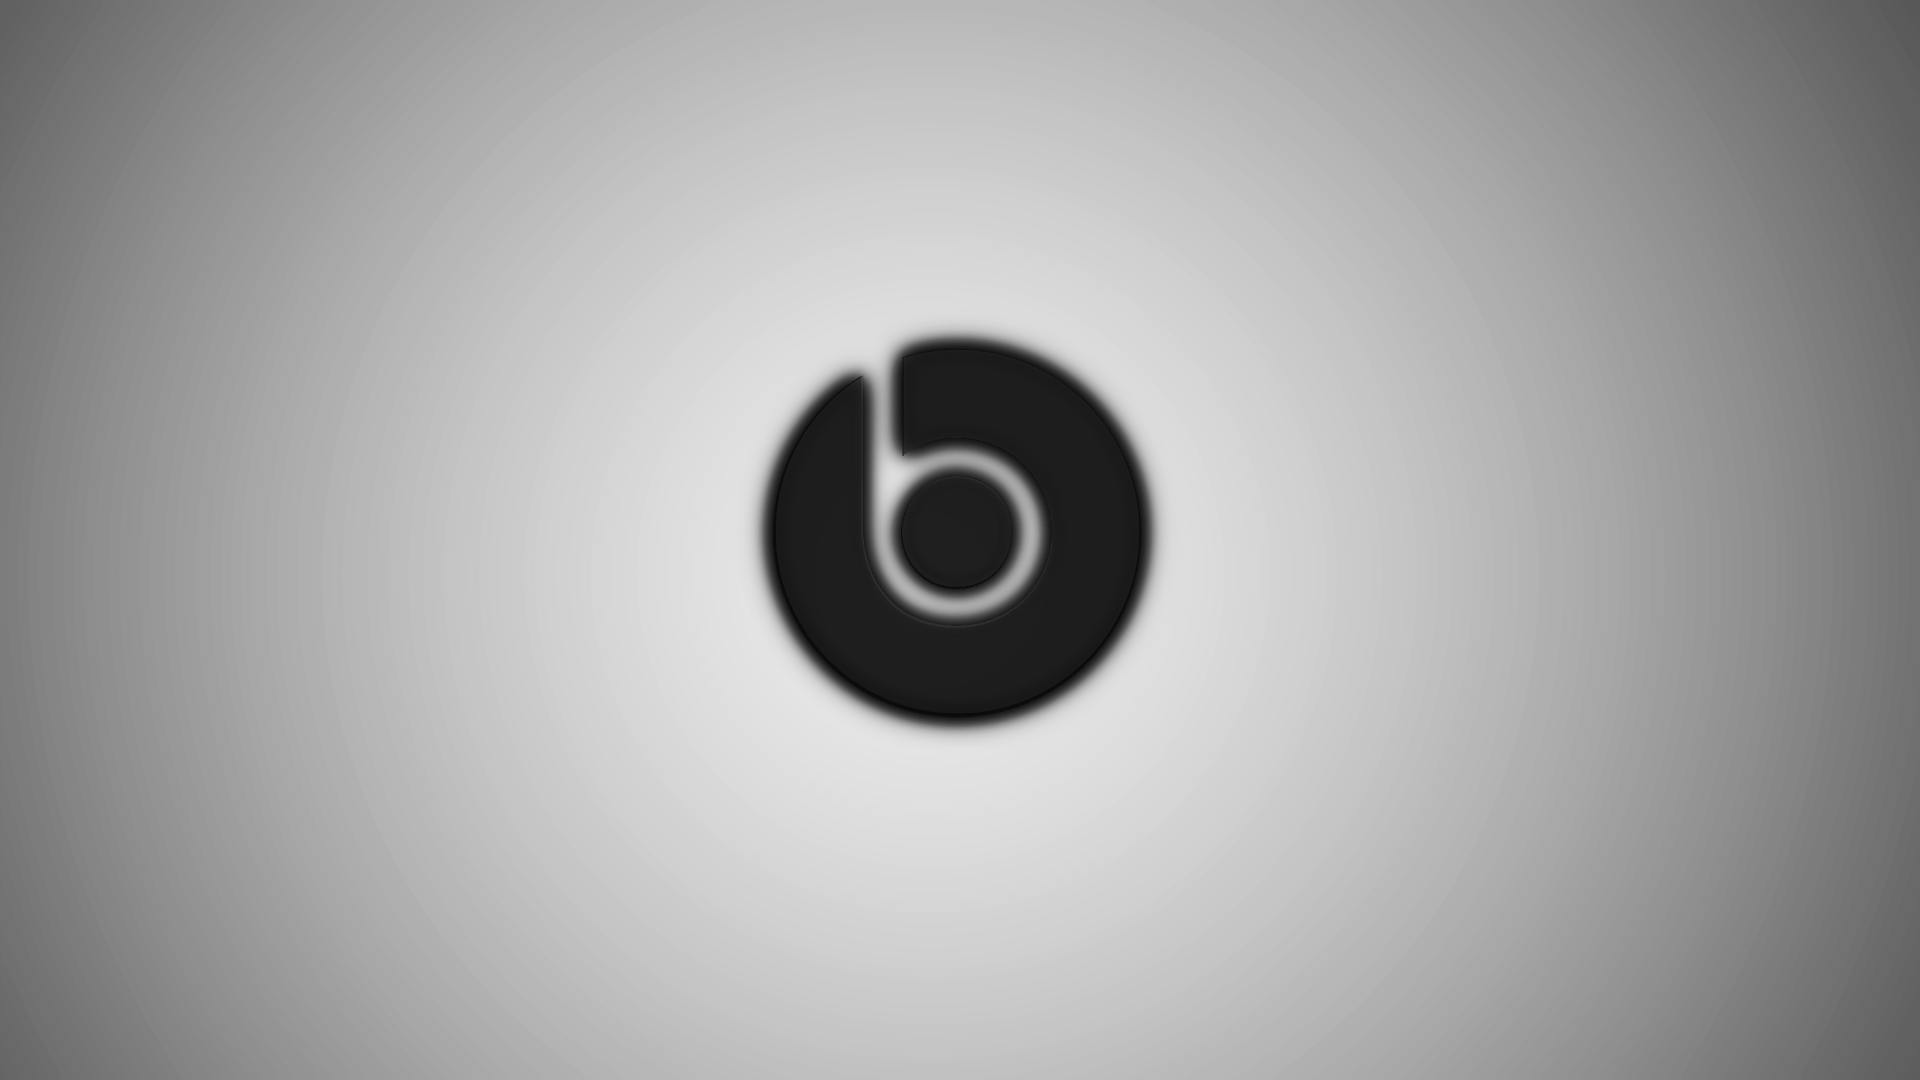 Black and White Beats Logo - Beats By Dr. Dre Wallpapers - Wallpaper Cave